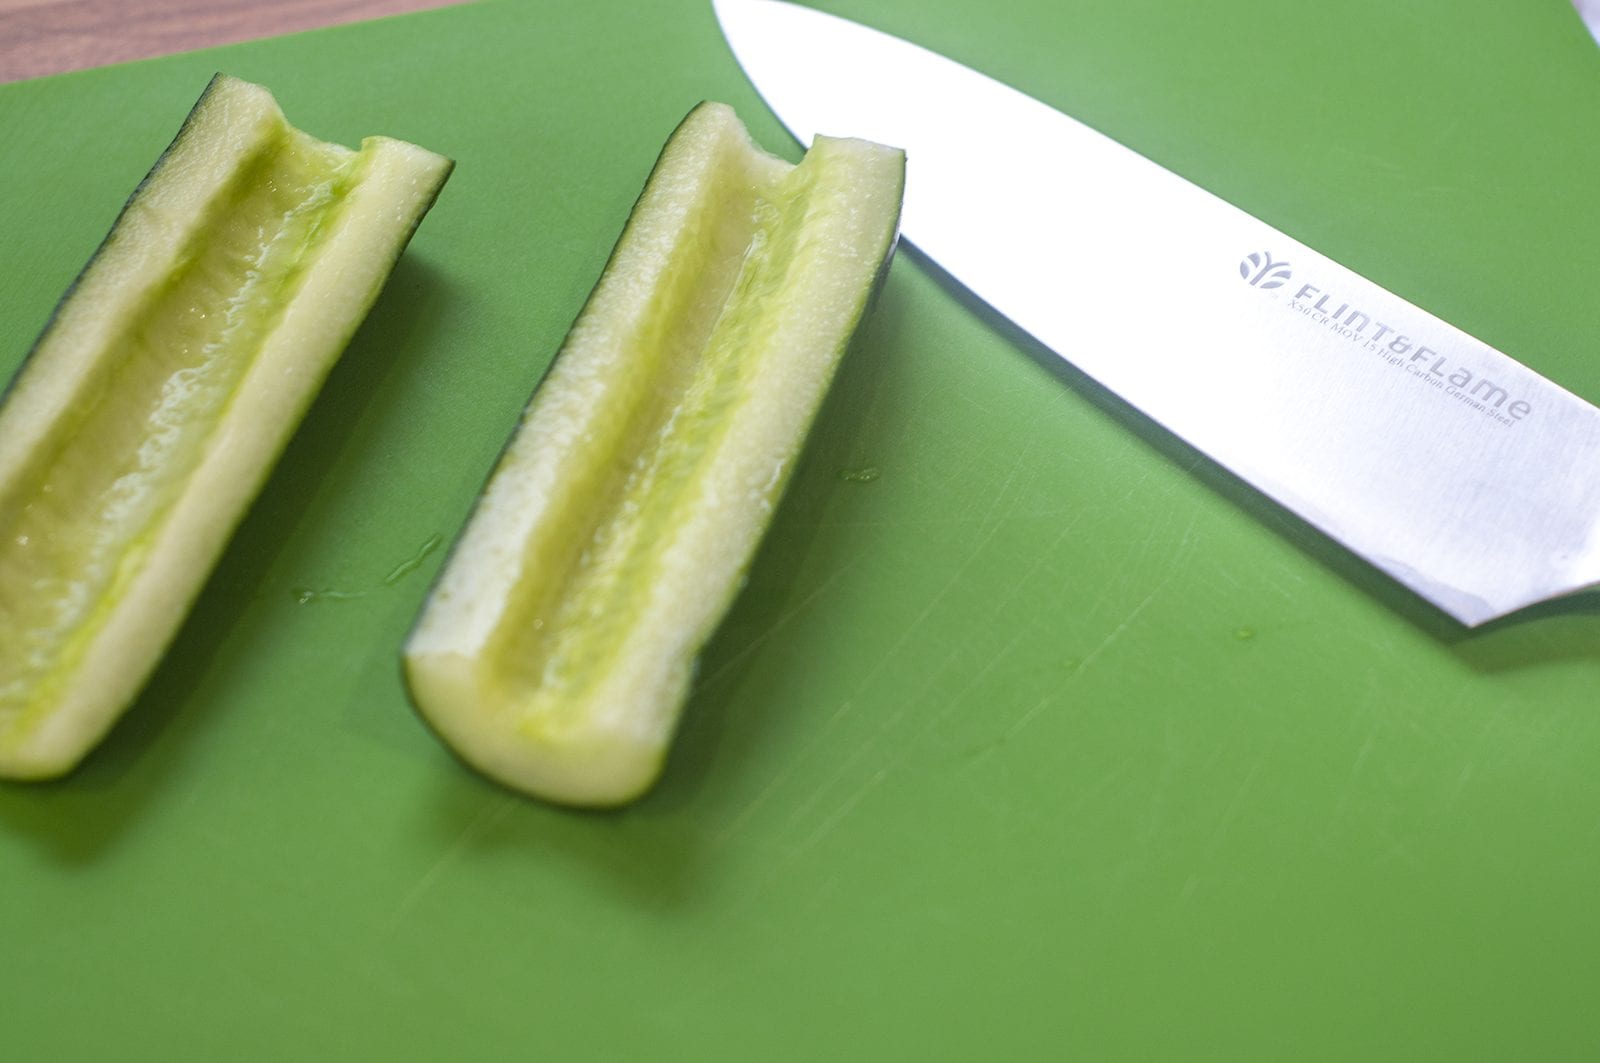 Sliced and de-seeded cucumber